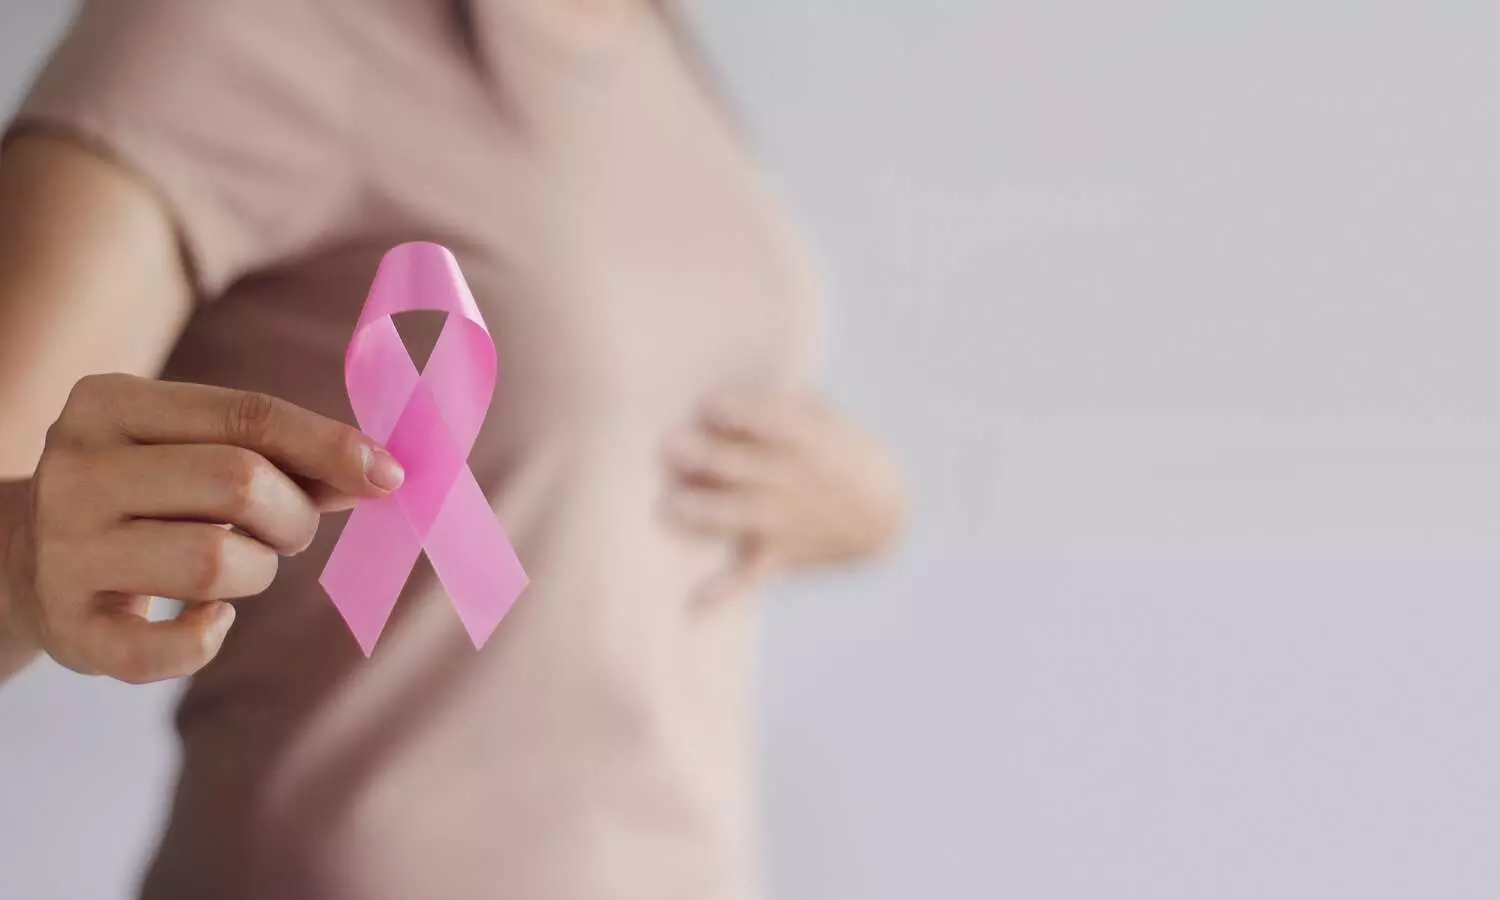 Exercise can reduce severity of side effects of breast cancer treatment